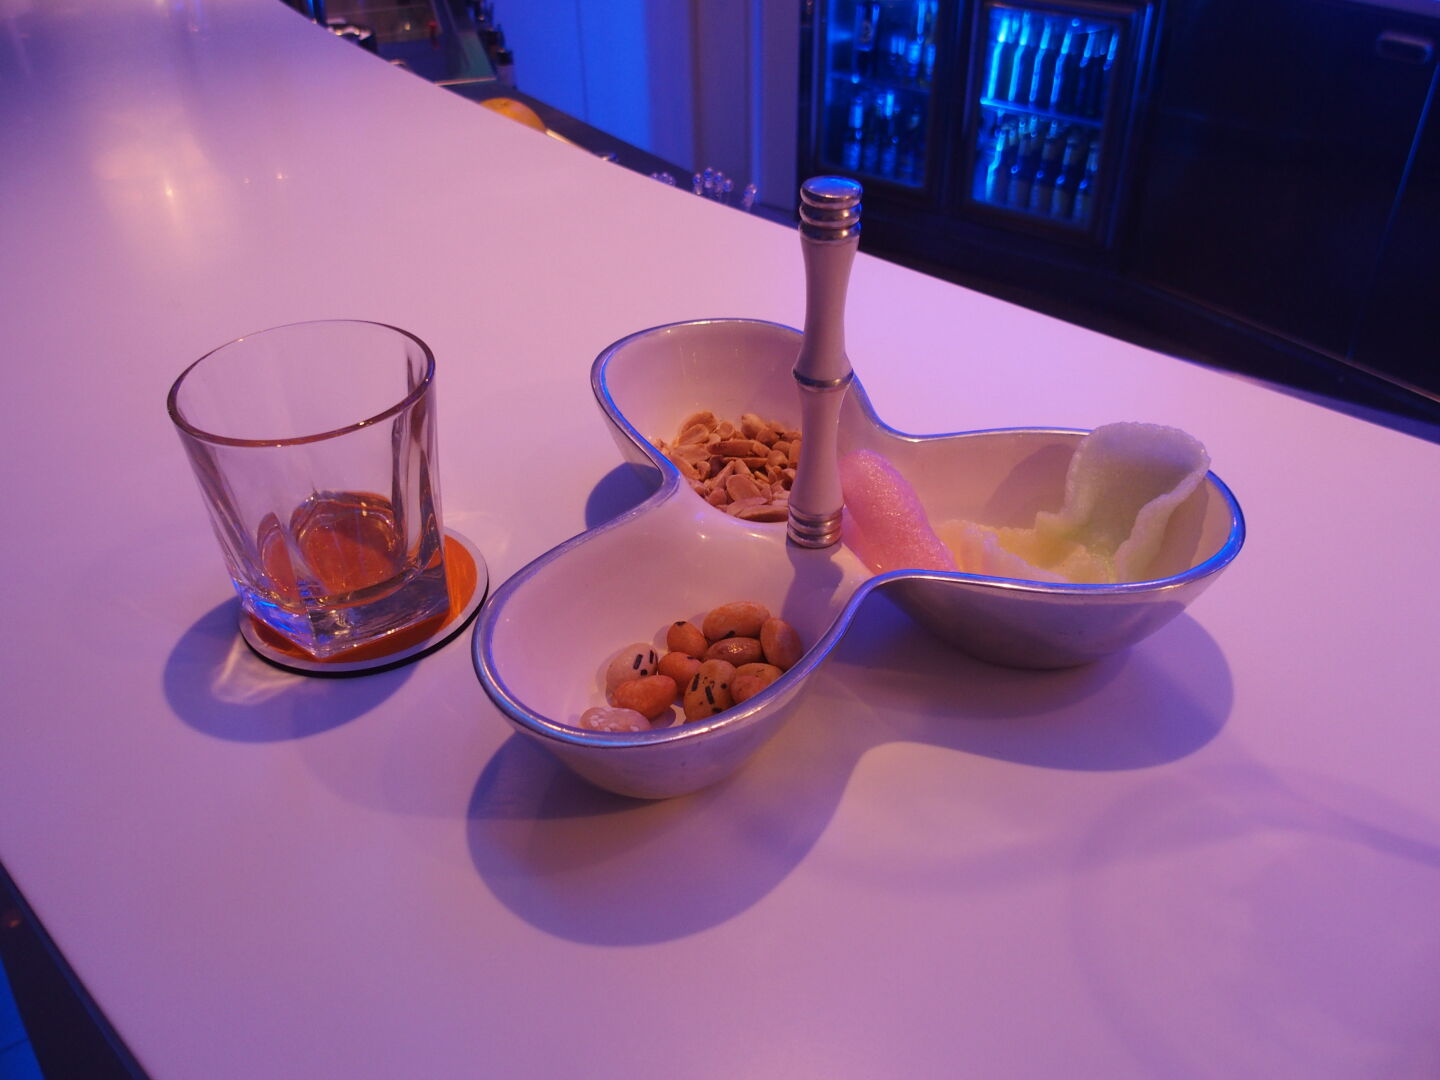 We spent a night at the Blue Bar, with whisky and japanese crackers, and (unfortunately) an elderly German couple who had already had too many whiskies (and with ice, at that!).